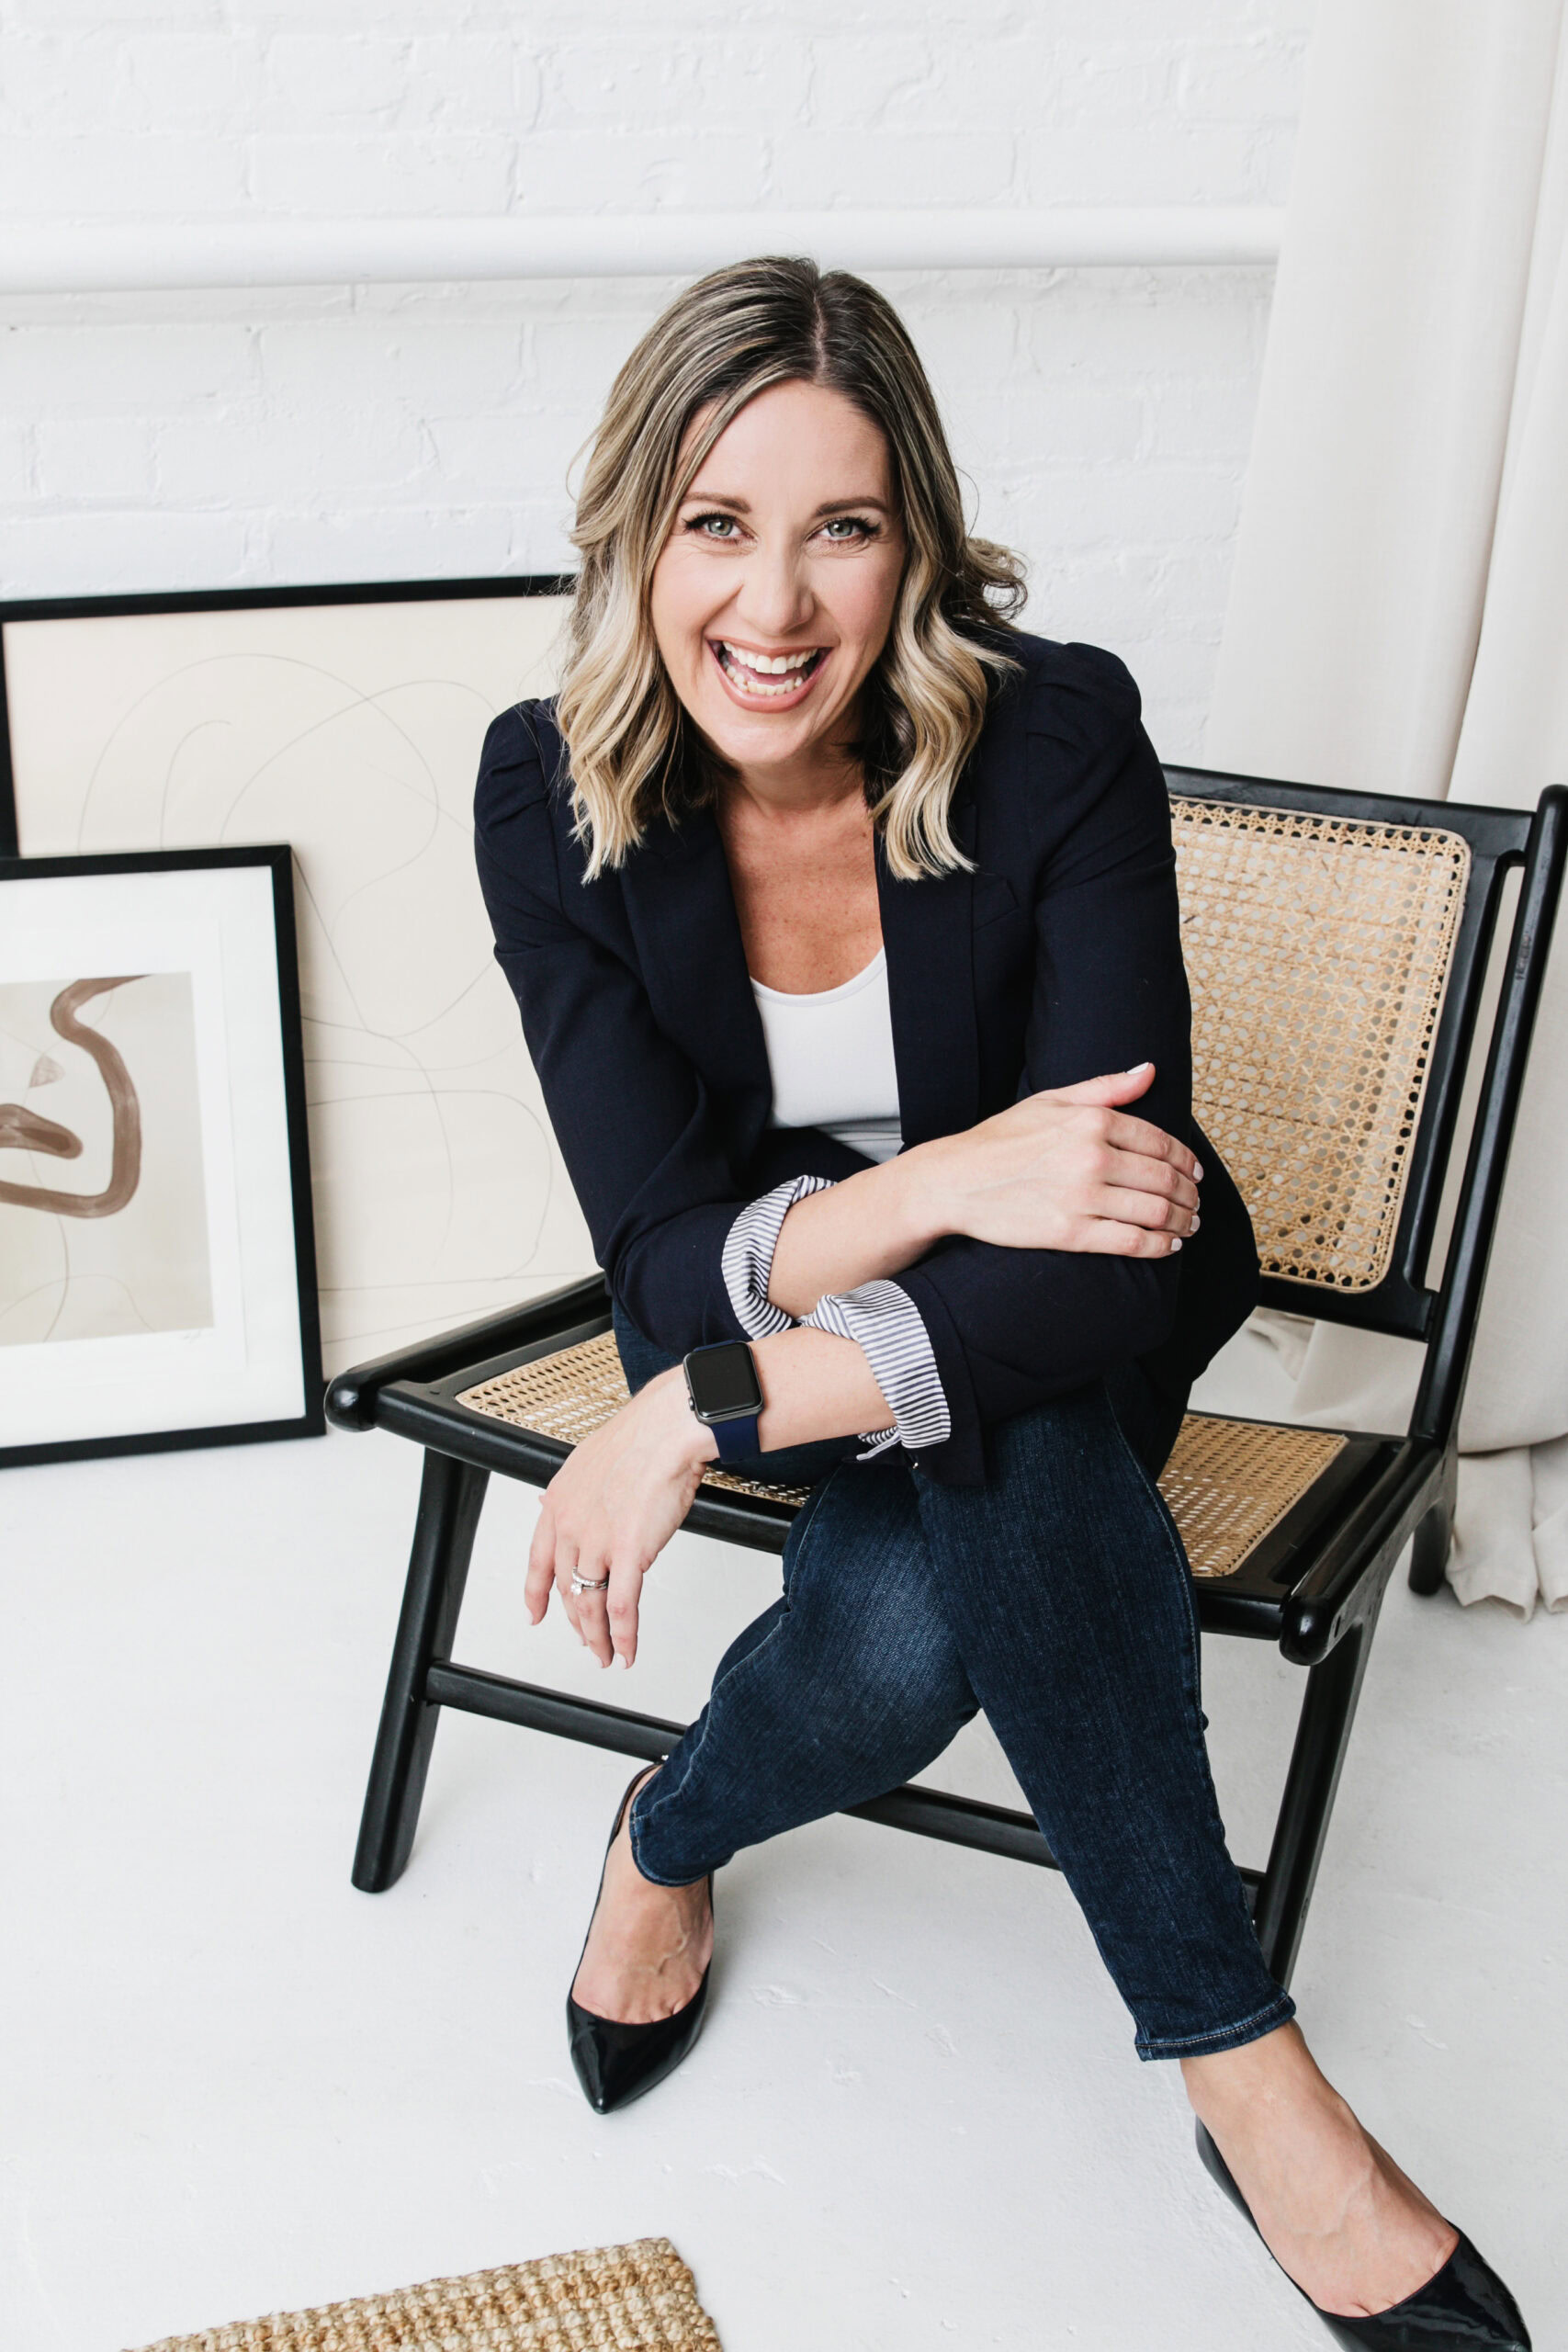 A smiling woman named Shannon Talbot in a navy blazer and striped shirt sits on a black chair in a white room, with framed artwork leaning against a wall nearby.